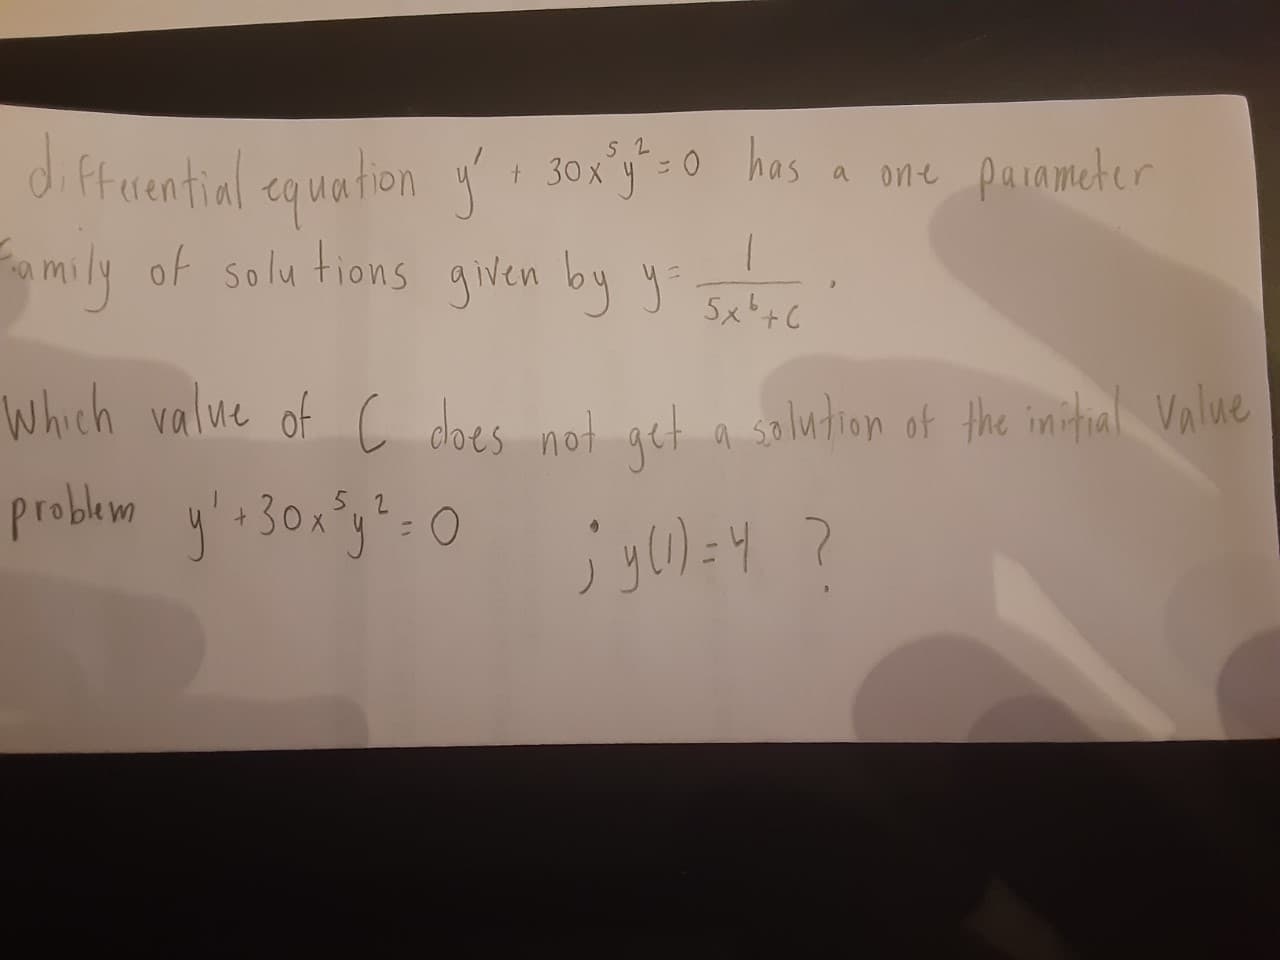 3ox'y 0 has
difruential equation
d ftaential equation
mily of solu tions given by
hos a ane painmeter
Jox'so
+ 30x 4
5x+C
Which value of c
problem y:30xg=0
L dloes not get a solution of the imitial Value
%3D
jyu)=4 ?
